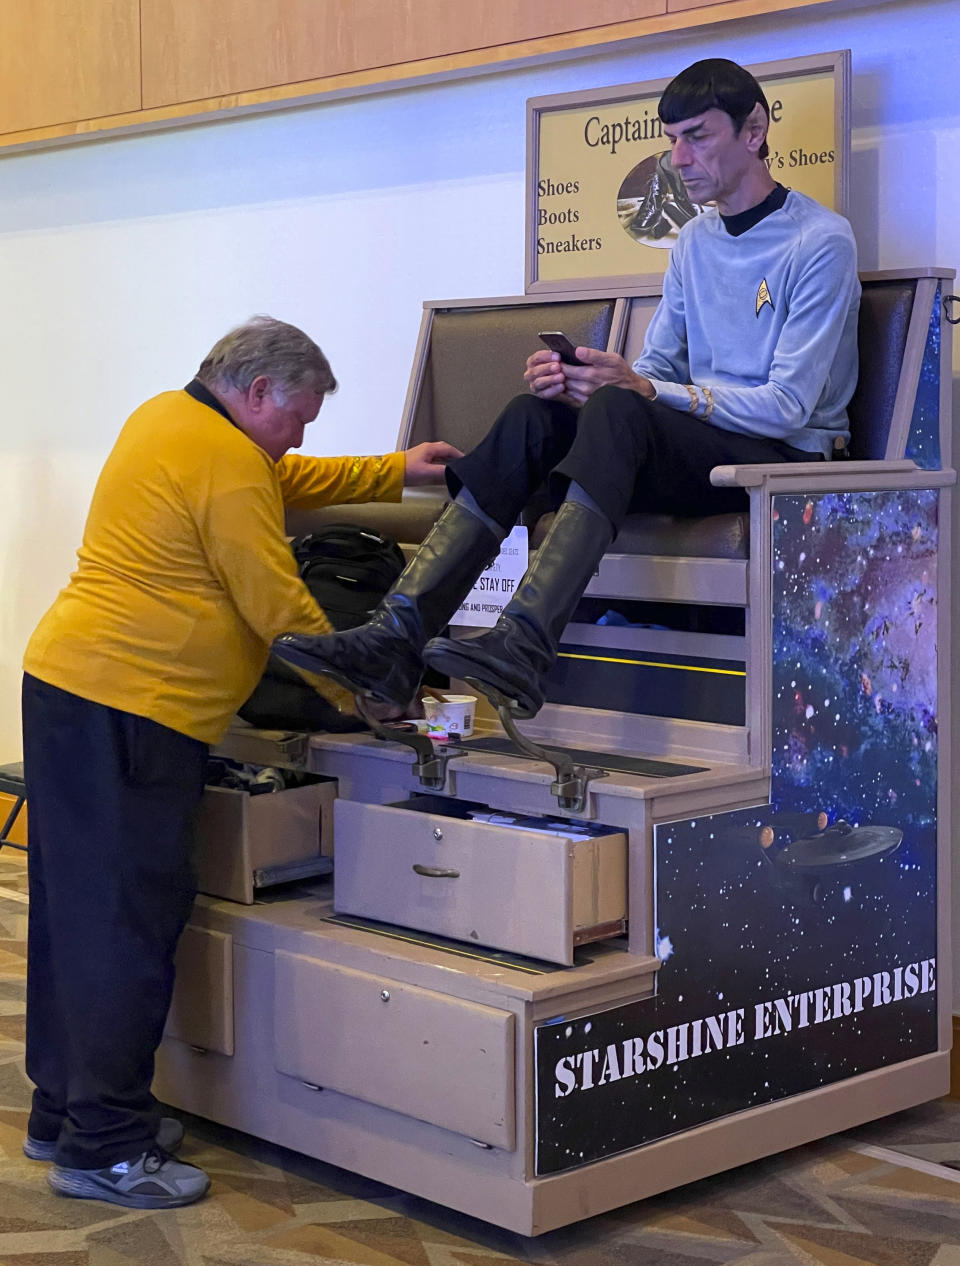 Daniel Golden, dressed as Captain Kirk, shines the shoes of Paul Forest, of Toronto, dressed as Spock, characters from "Star Trek," at day one of Comic-Con International on Thursday, July 21, 2022, in San Diego. (Photo by Max Ulichney/Invision/AP)